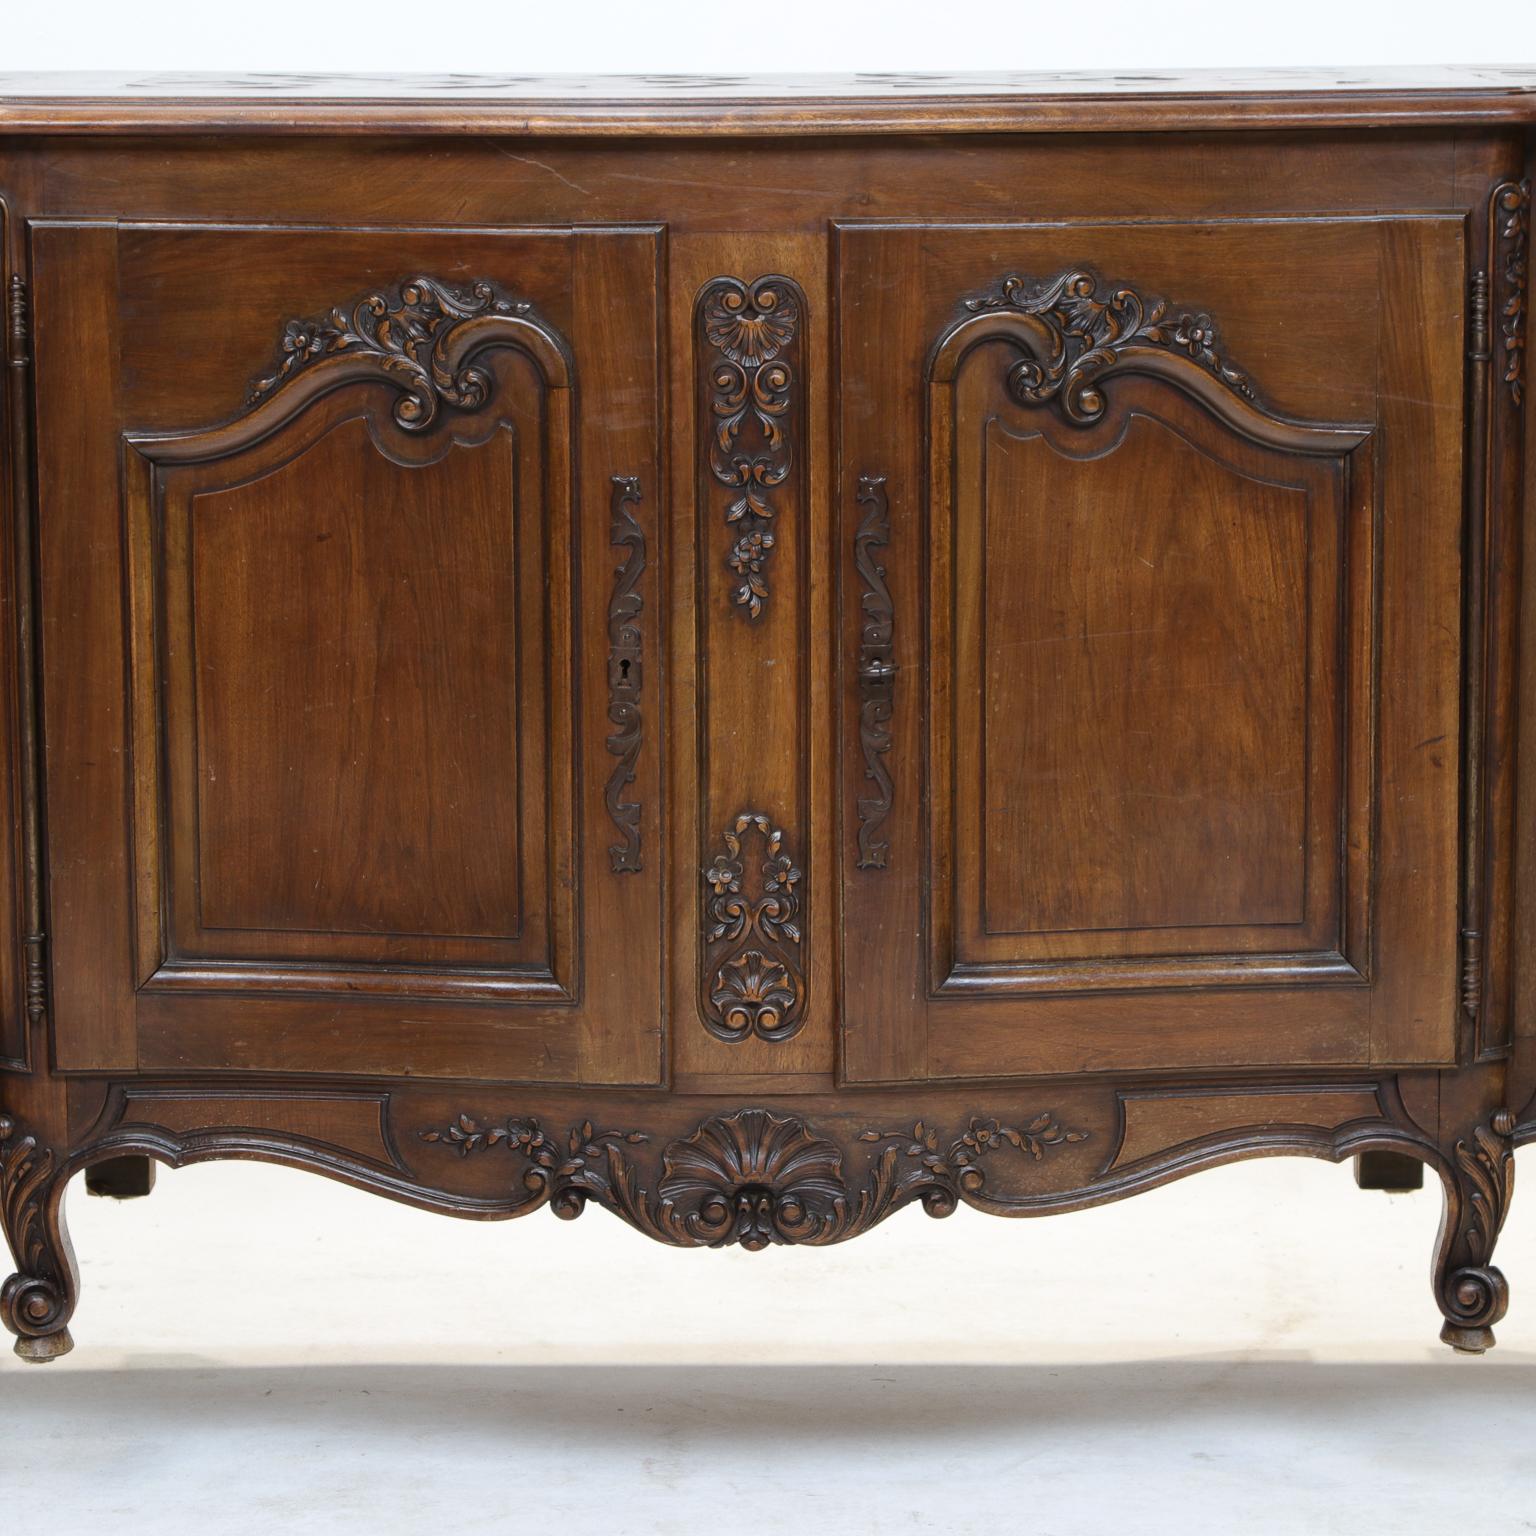 A fine French Provincial walnut Enfilade. Nice carved panel doors. 4 doors open to shelves with ample storage. The top has parquetry work and breakfront. Nice carved apron and resting on scroll legs.